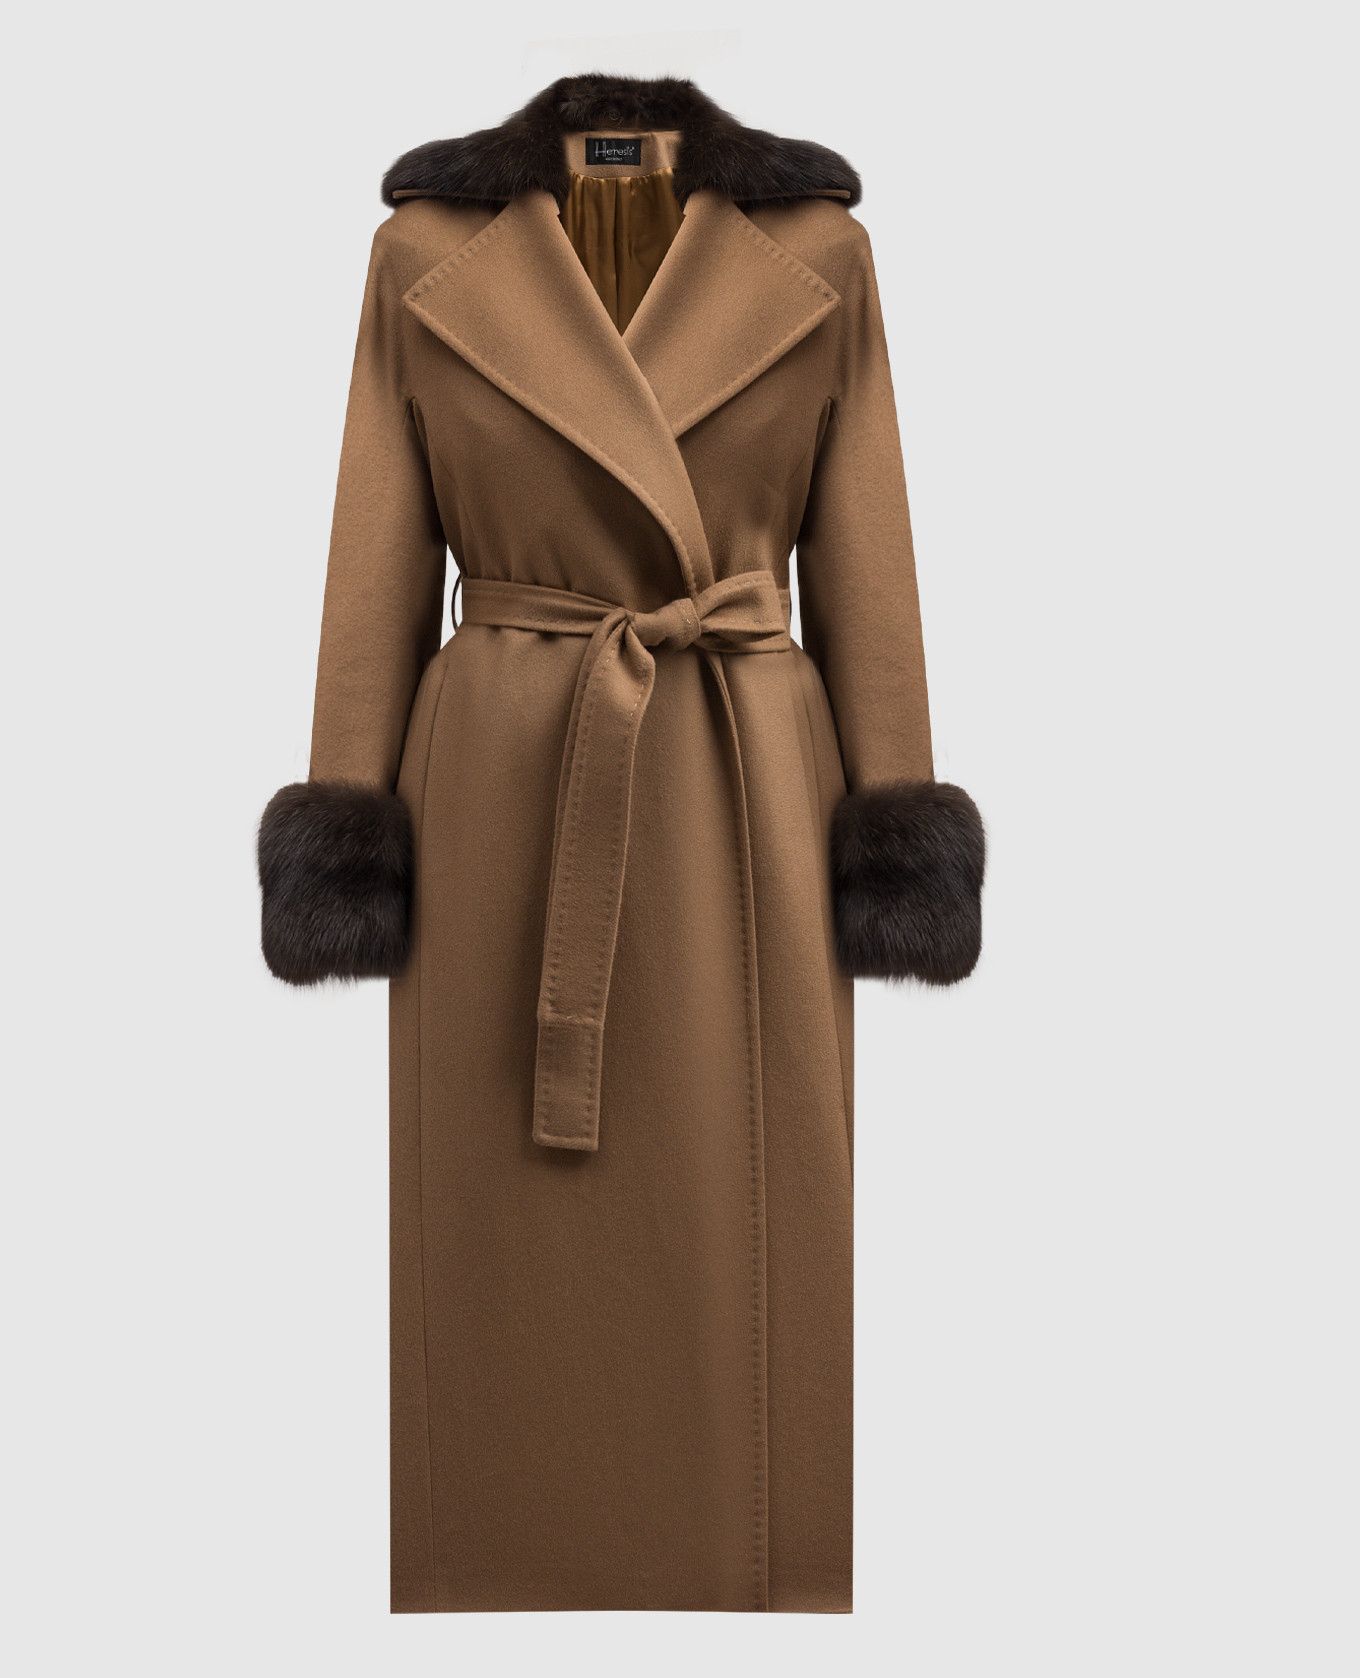 Brown coat of wool with sable fur